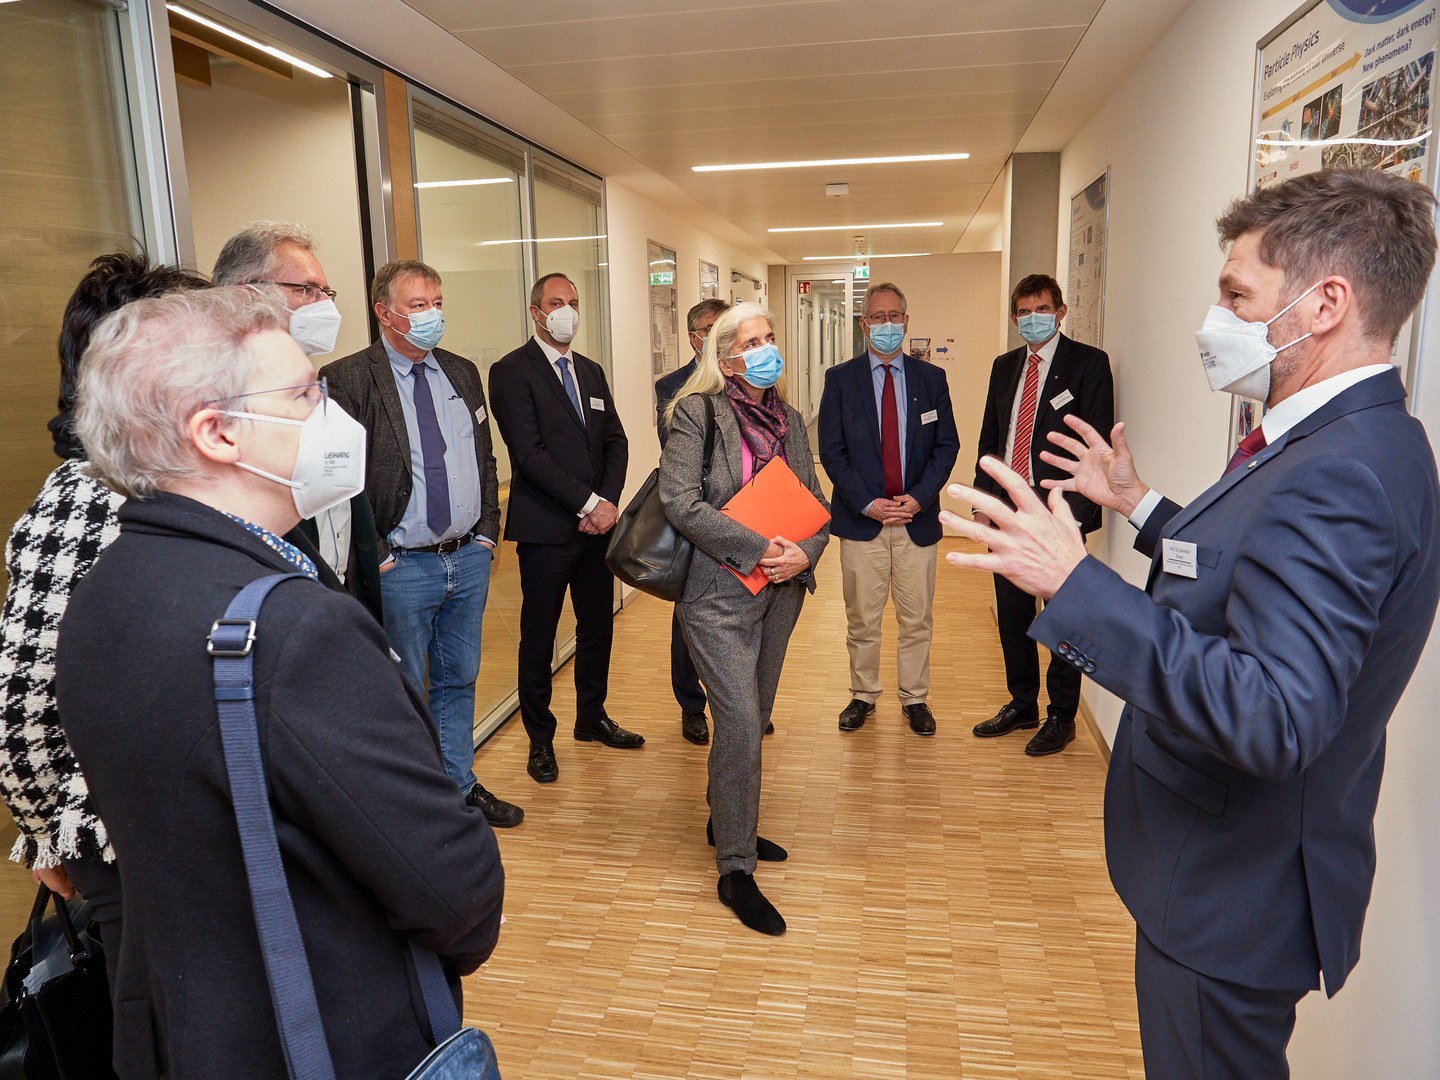 Prof. Dr. Bernhard Ketzer (right) gives an introduction to the work at the FTD.